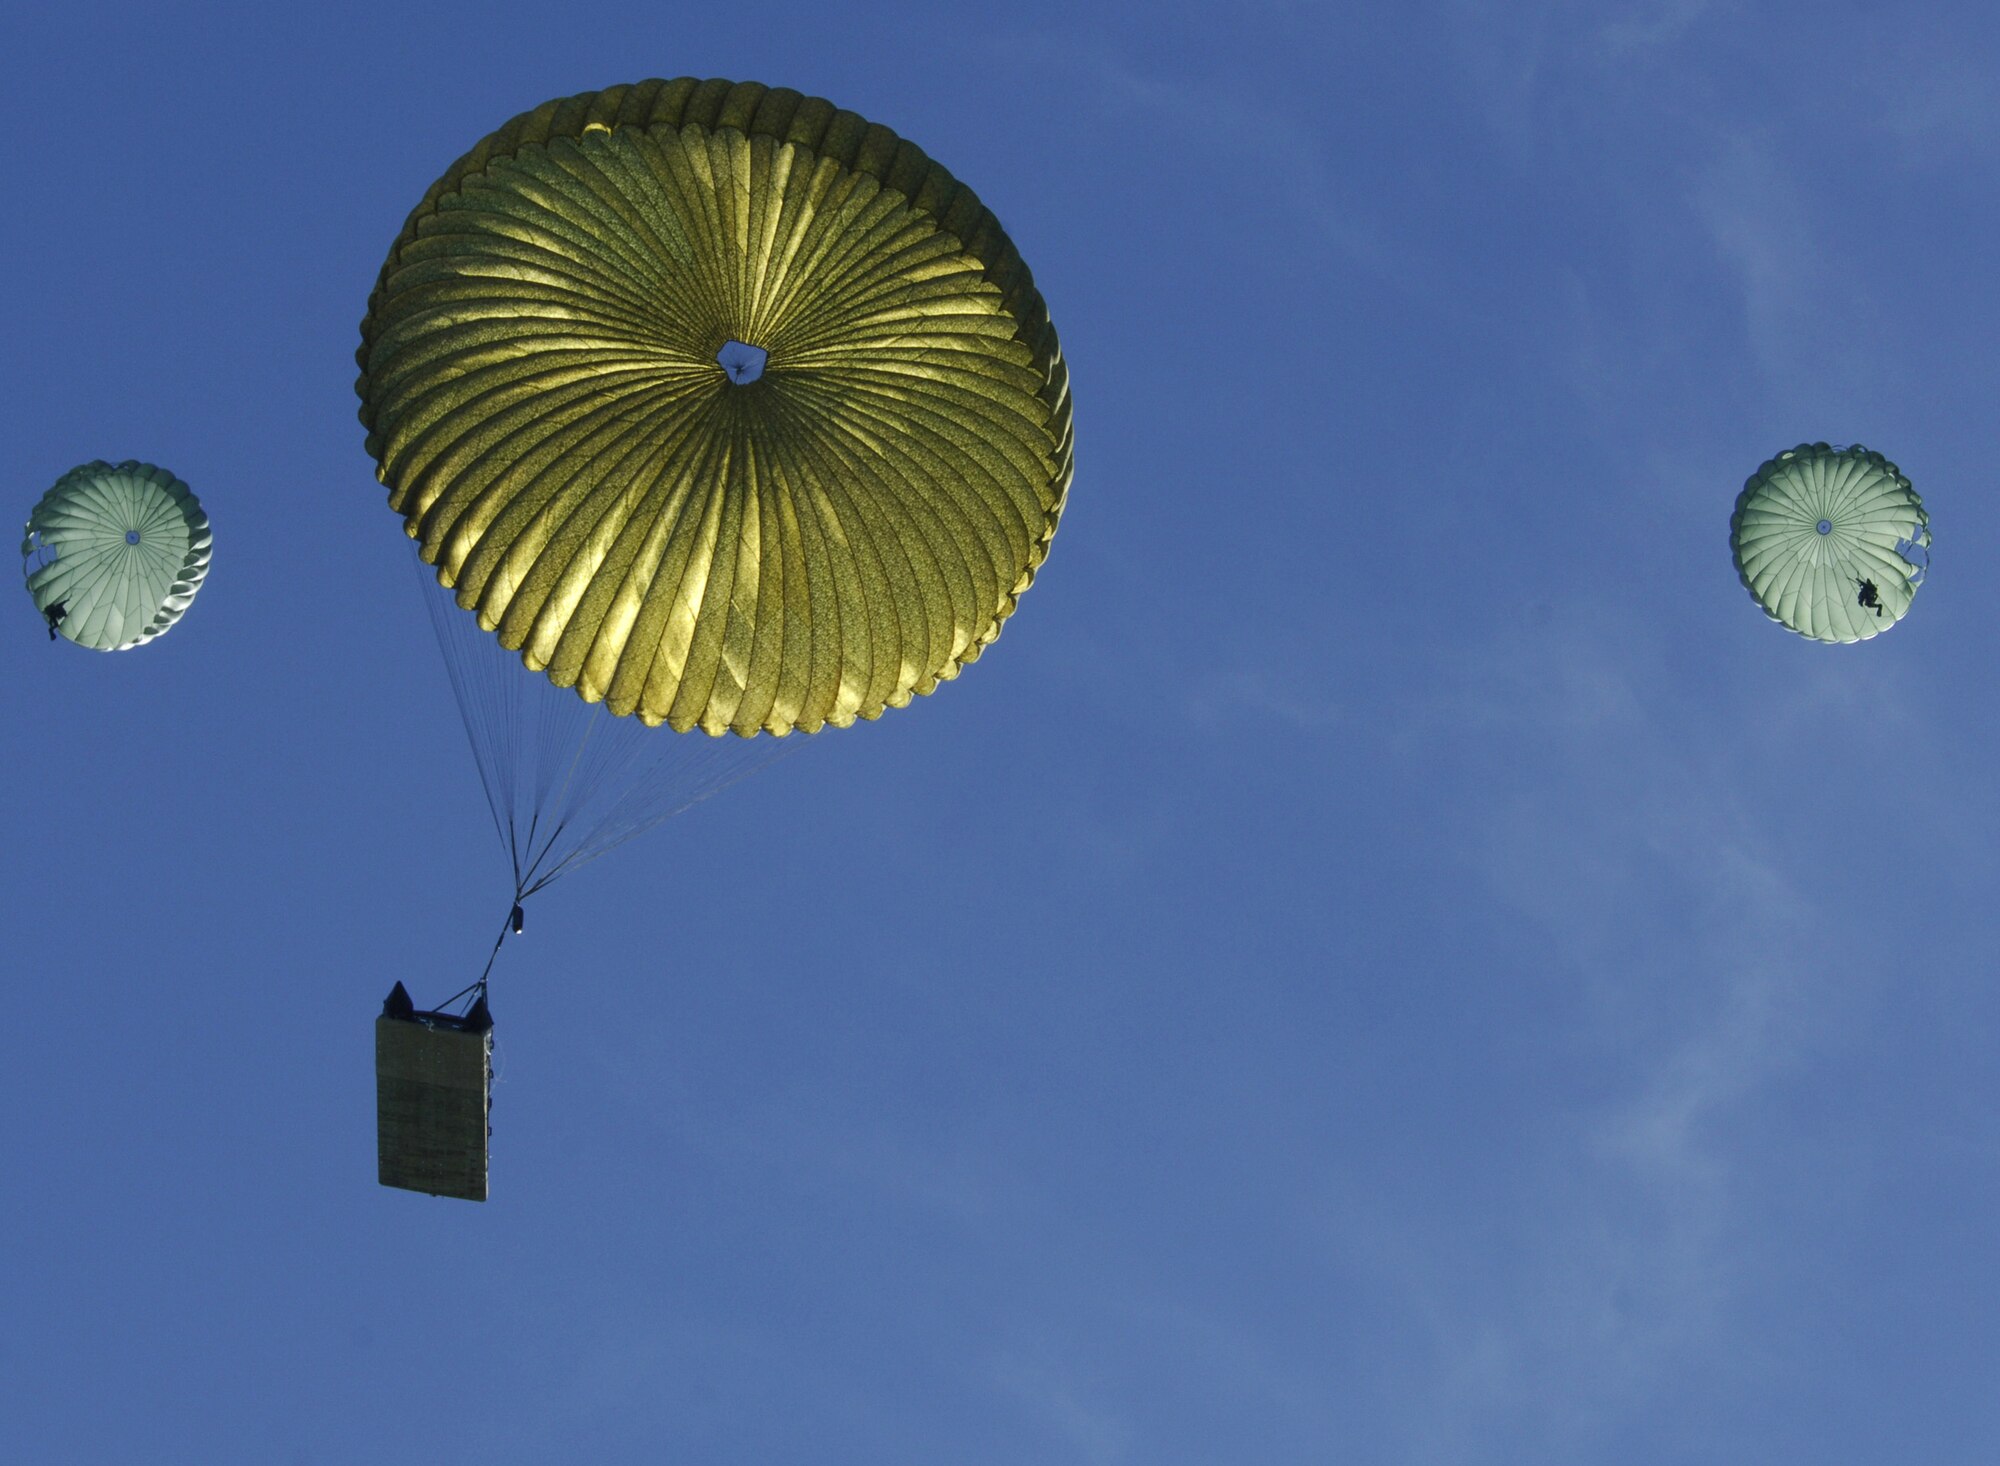 Pararescuemen and a fully-inflated zodiac raft parachute down to the ‘Shark Water’ drop zone during a recent three-day exercise at Key West Naval Air Station, Fla. During the trip, the 71st and 38th Rescue Squadrons combined efforts to test two life-saving capabilities; the Hard Duck and Advanced Rescue Craft processes. (U.S. Air Force photo by Senior Airman Javier Cruz)